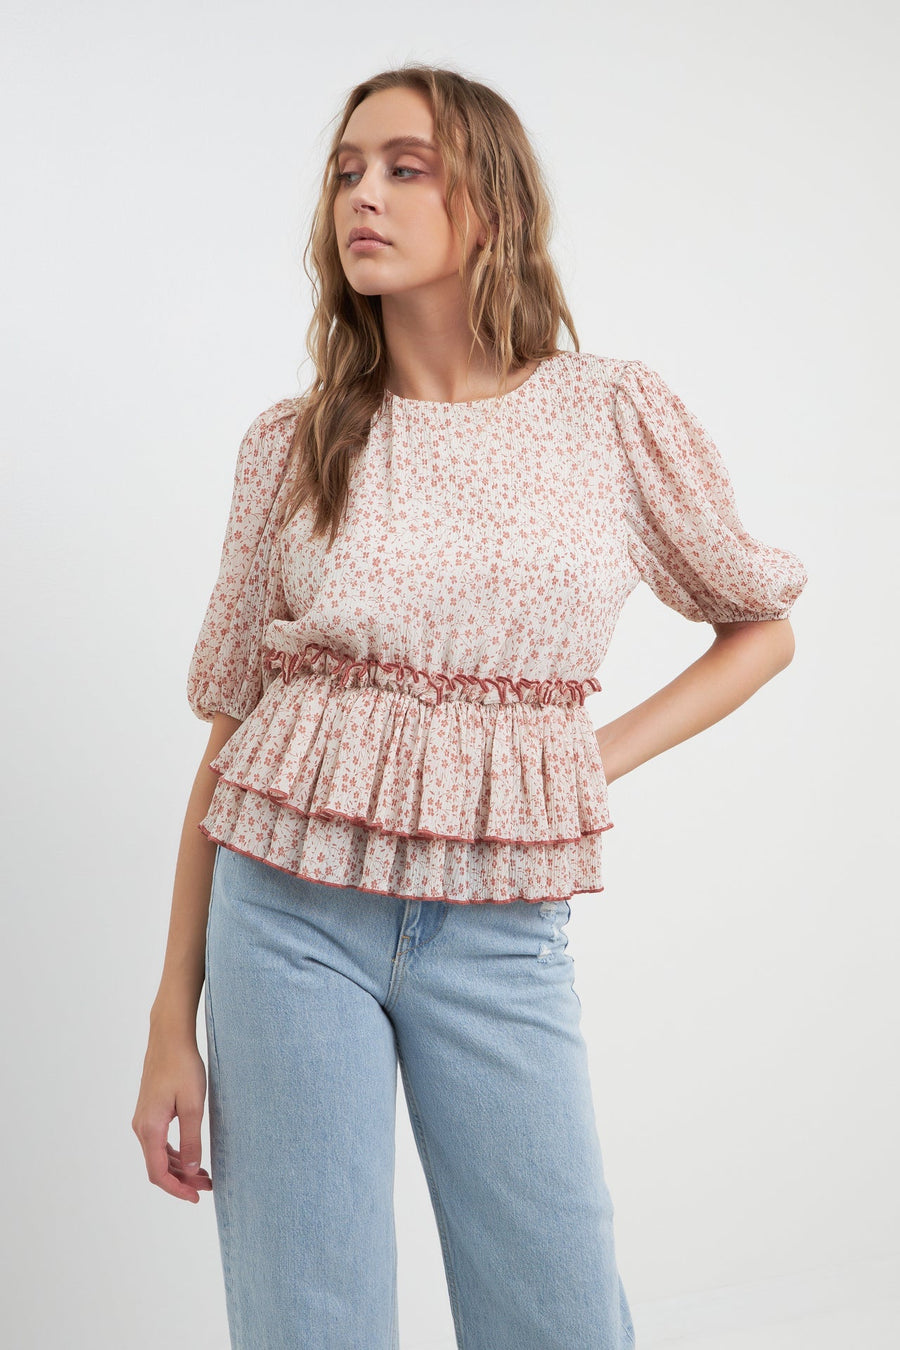 FREE THE ROSES-Pleated Floral Top-TOPS available at Objectrare